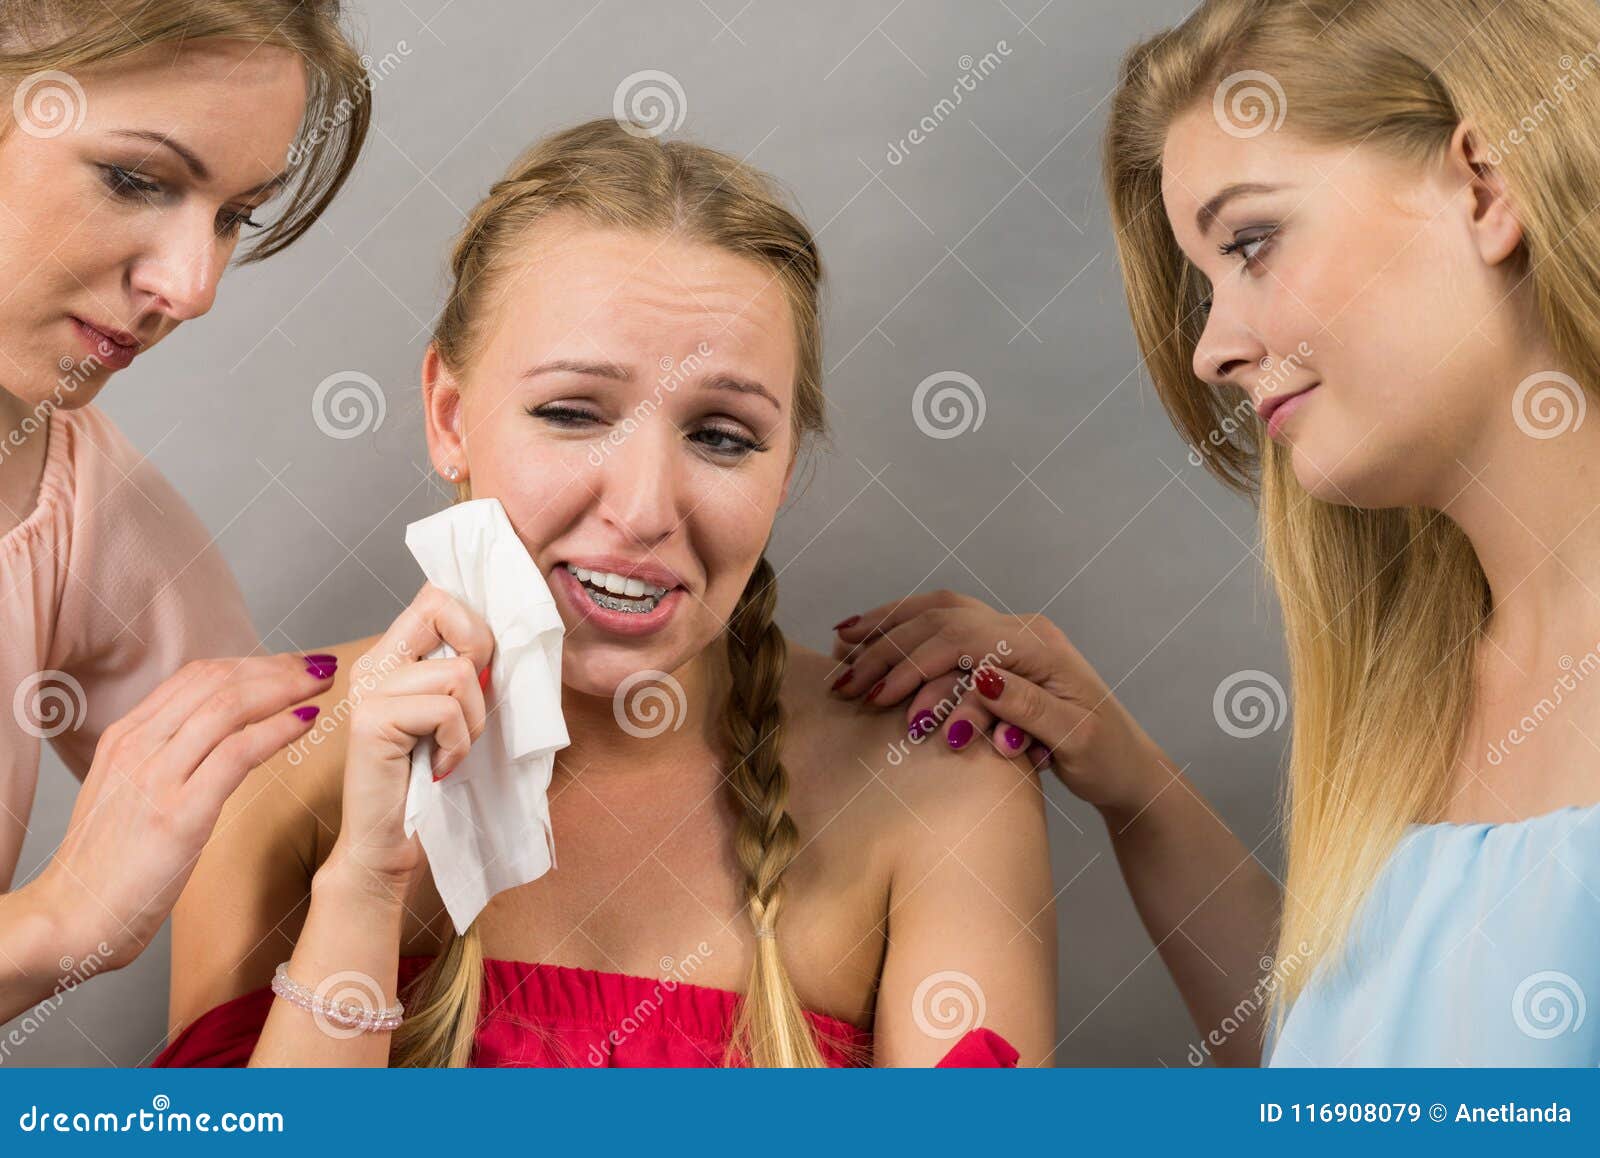 Friends Helping Sad Woman Stock Image Image Of Nose 116908079 